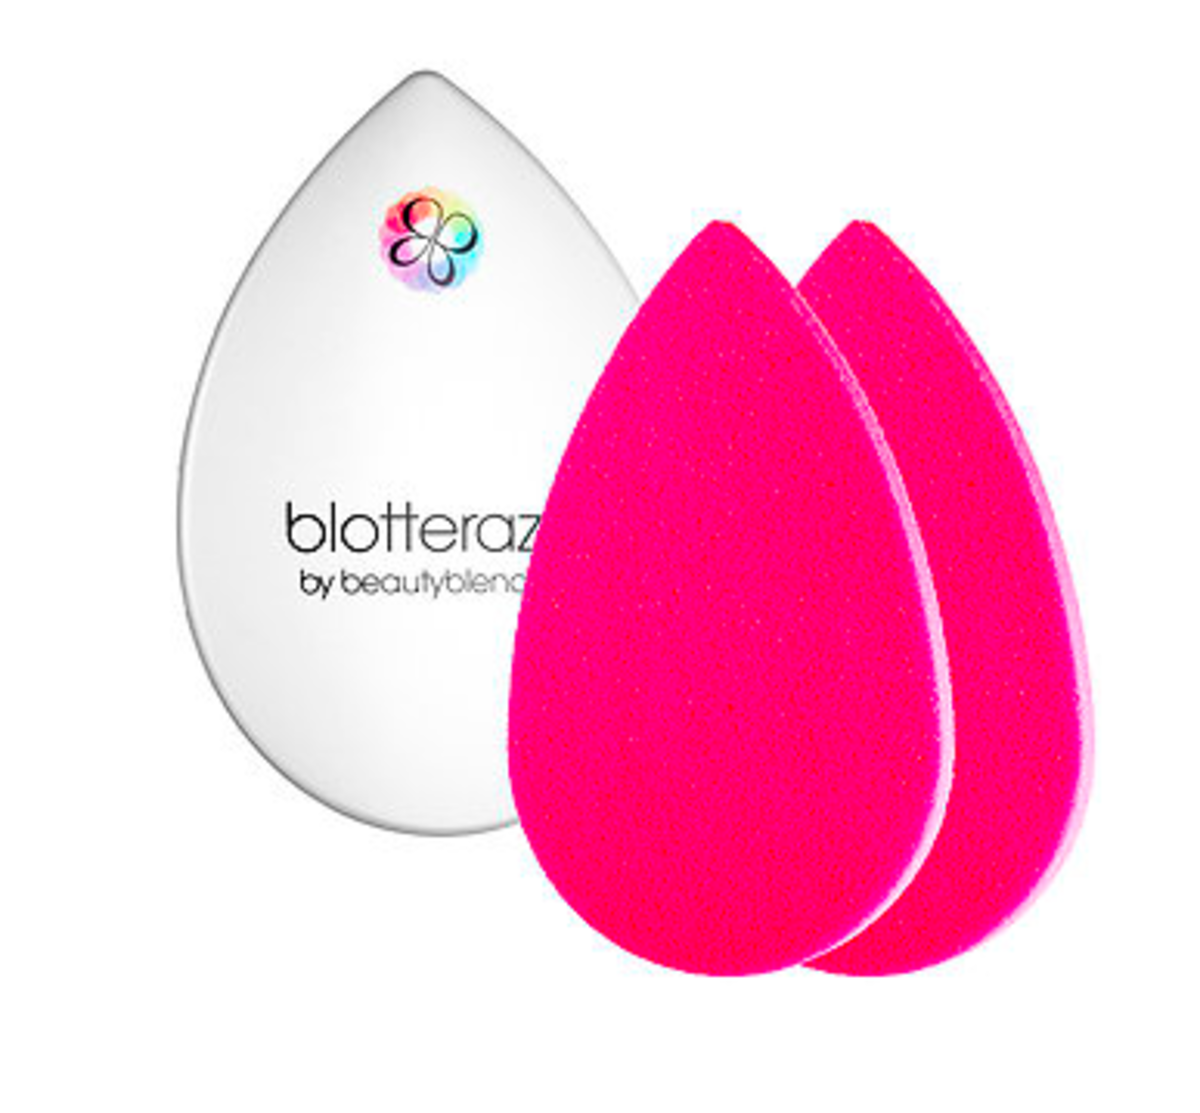 The "blotting thing" in question. Photo: Beauty Blender